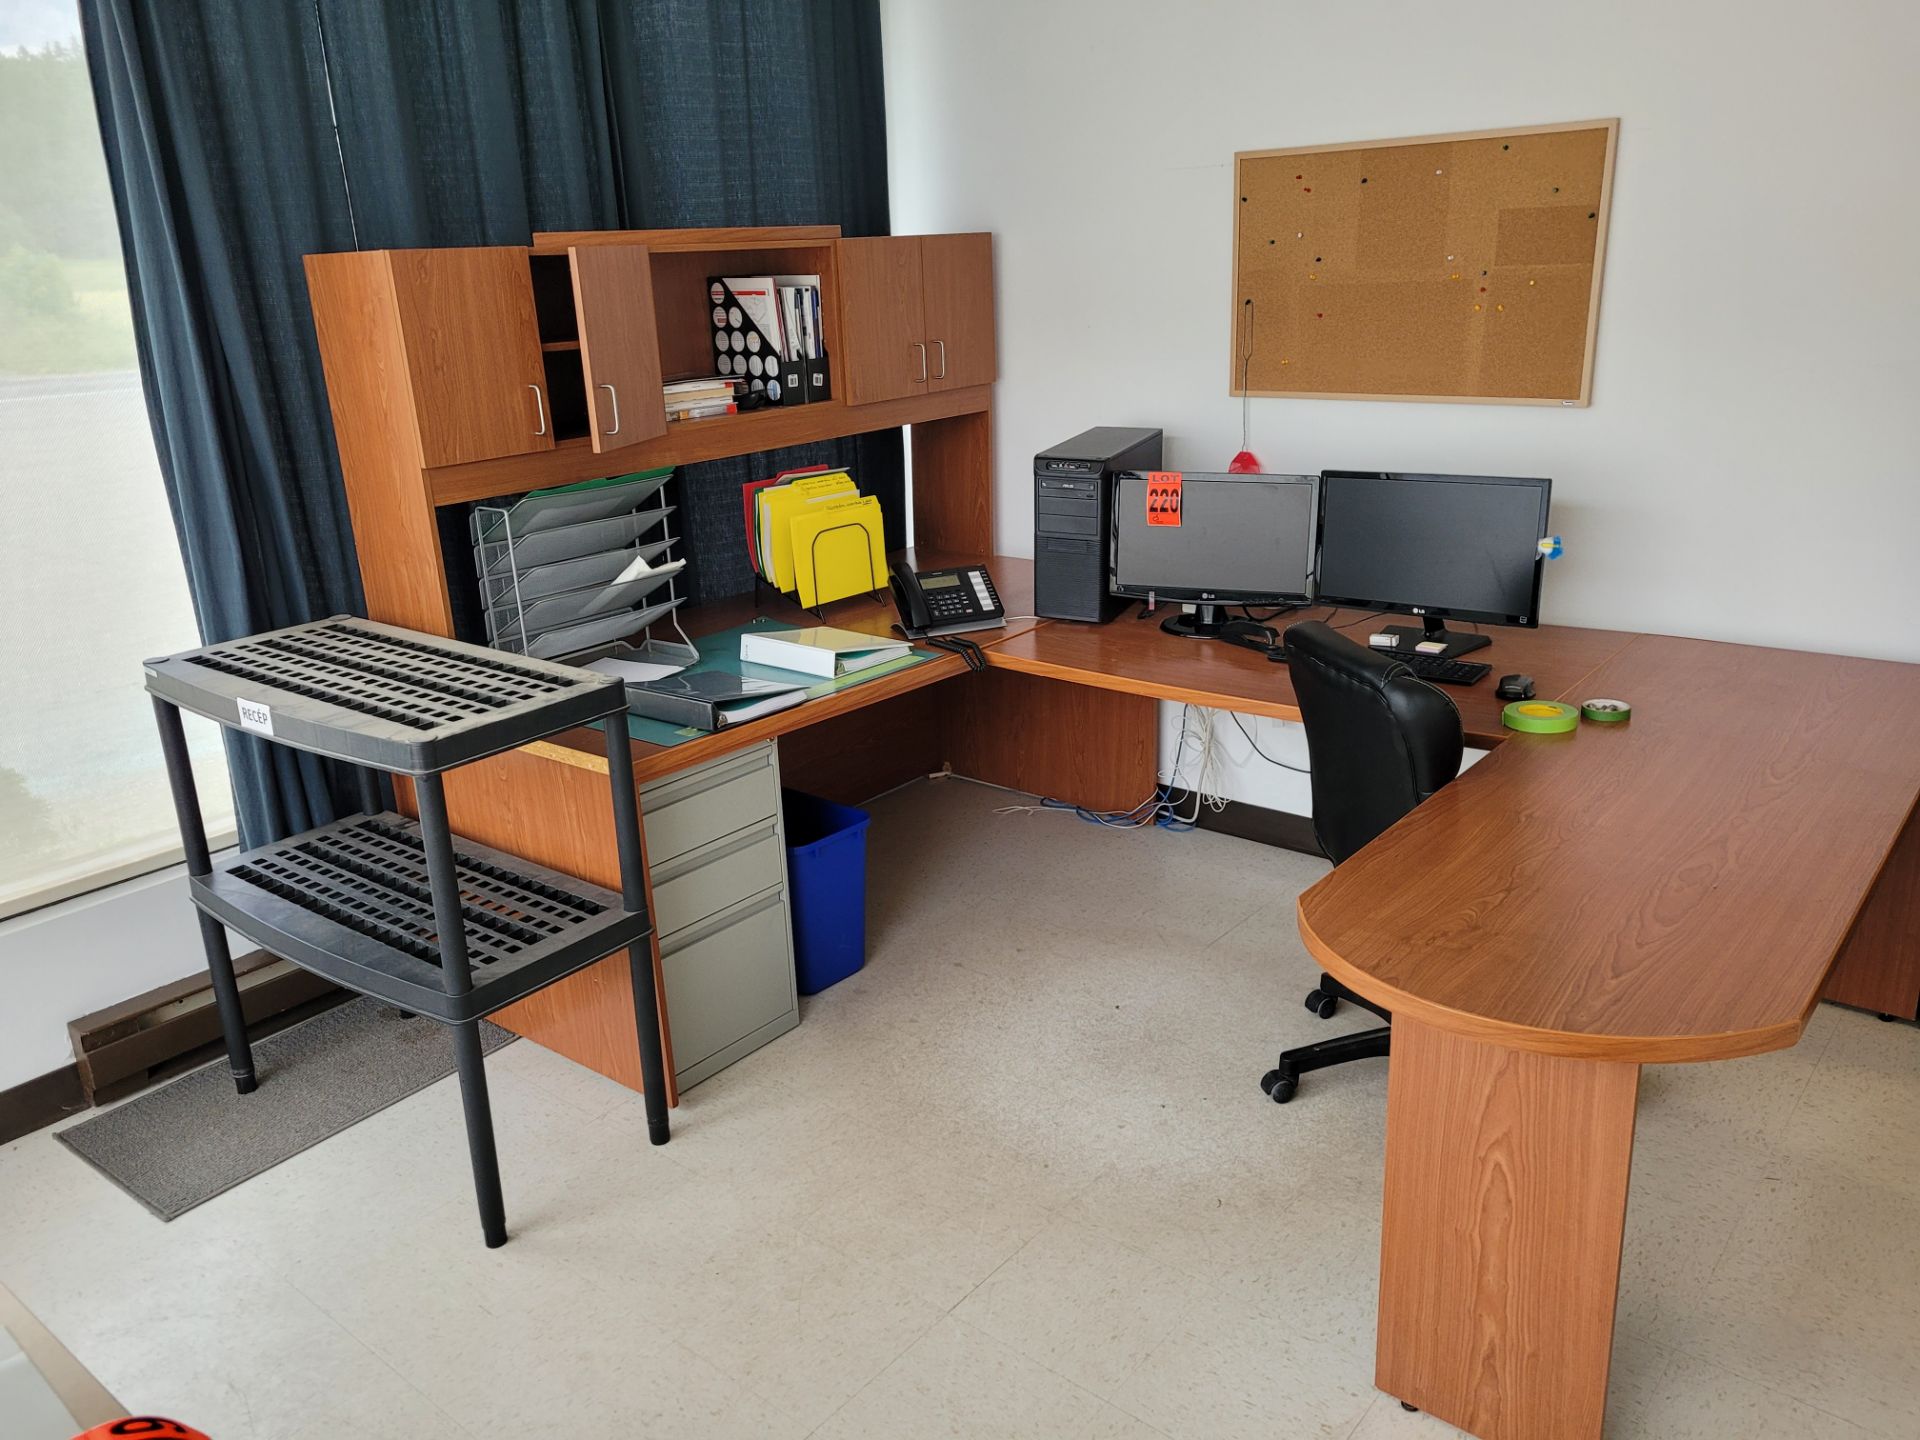 Lot of office furniture incl. U-shape office desk with credenza, filing cabinet, chair, table, shelf